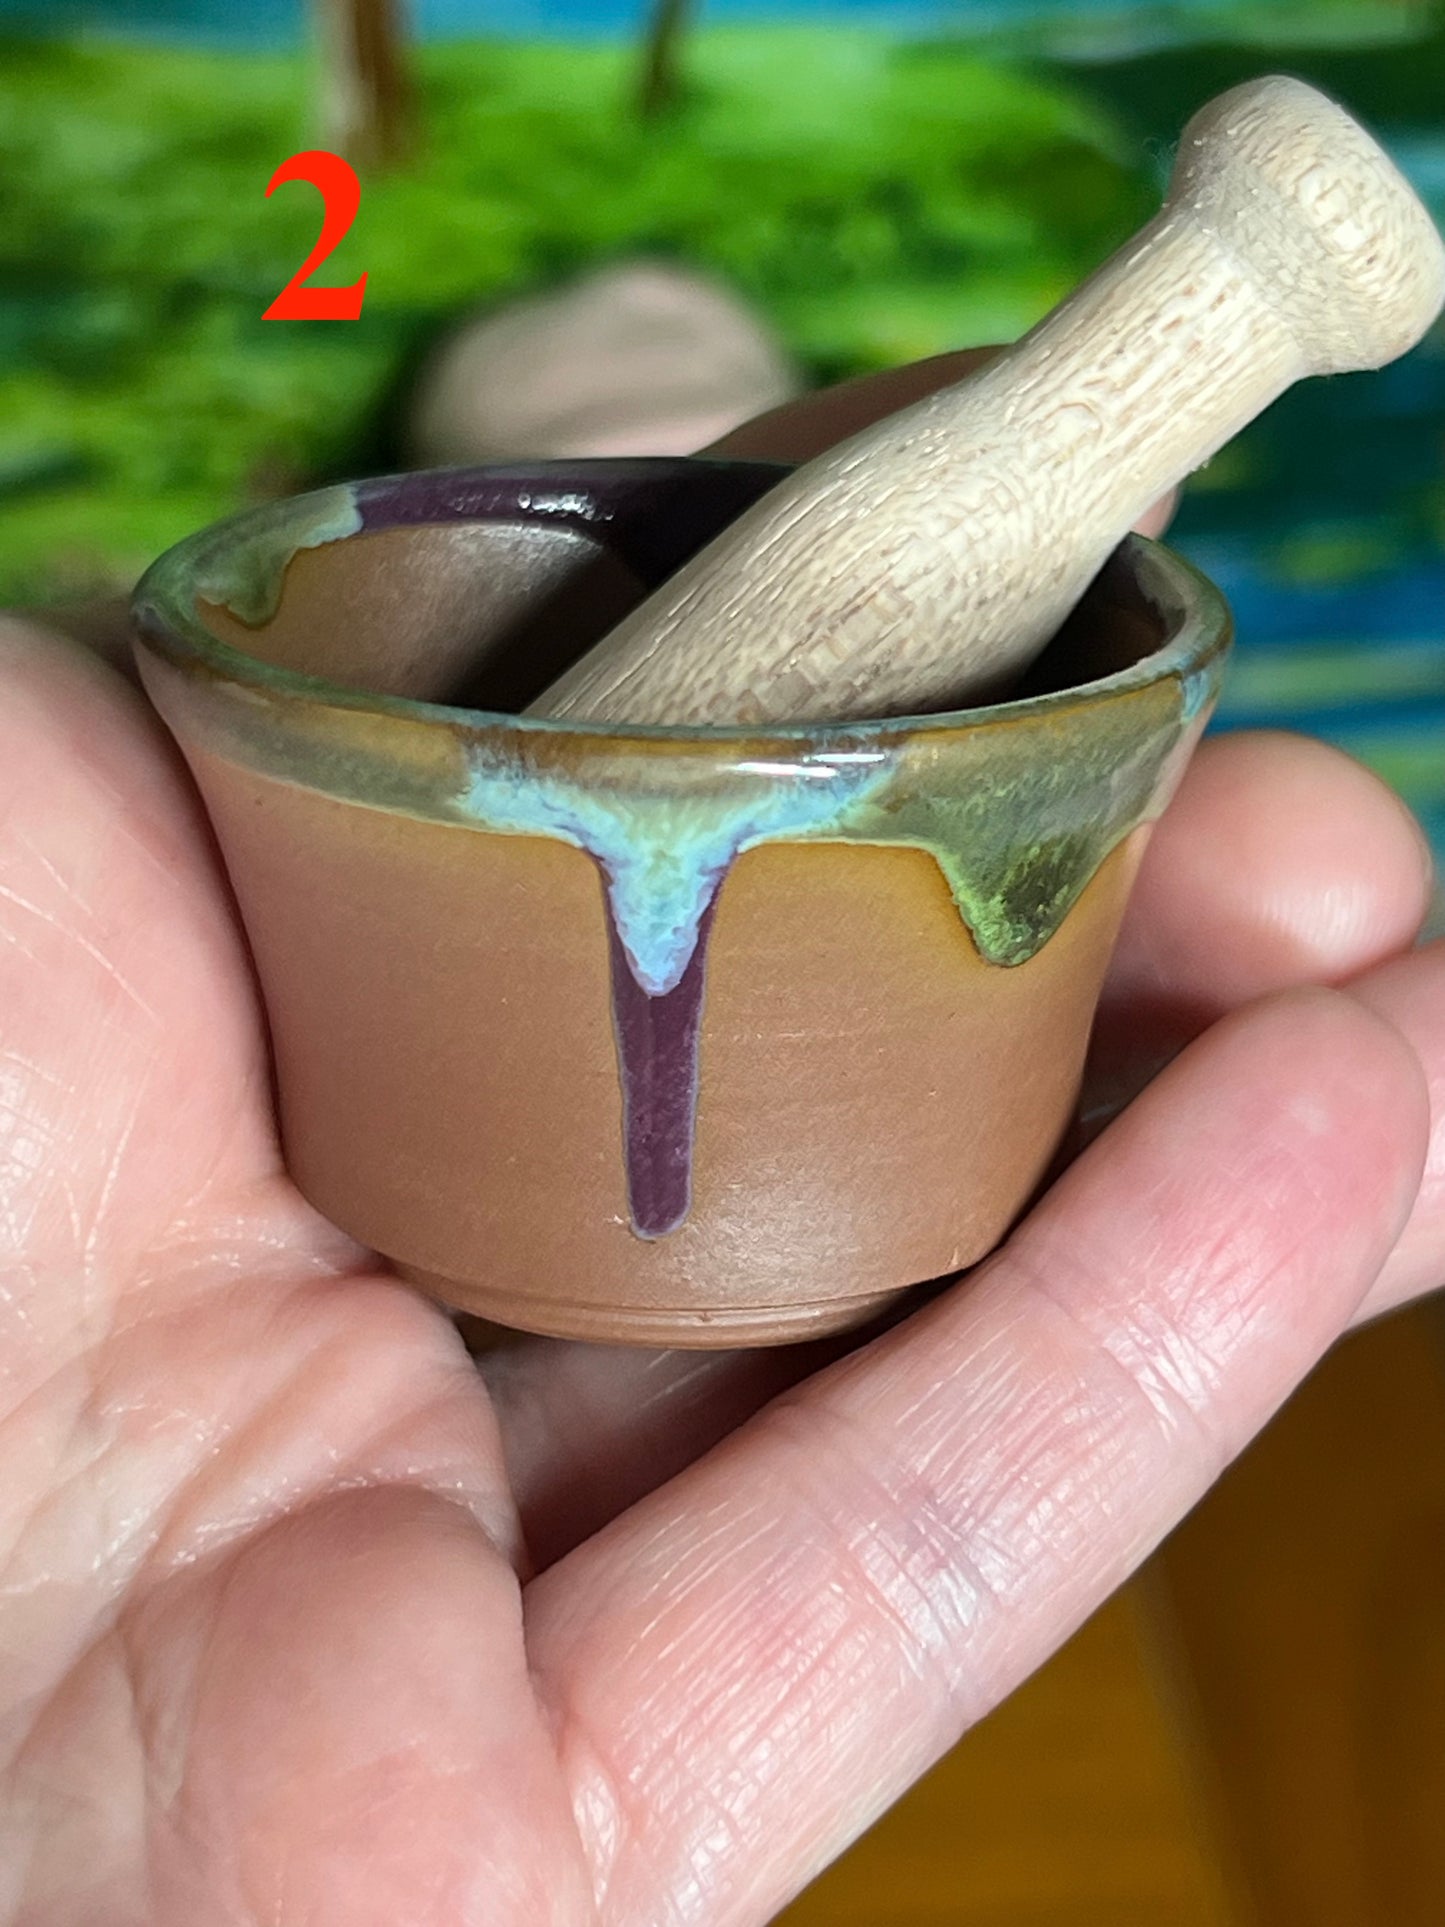 Small Mortar and Pestle